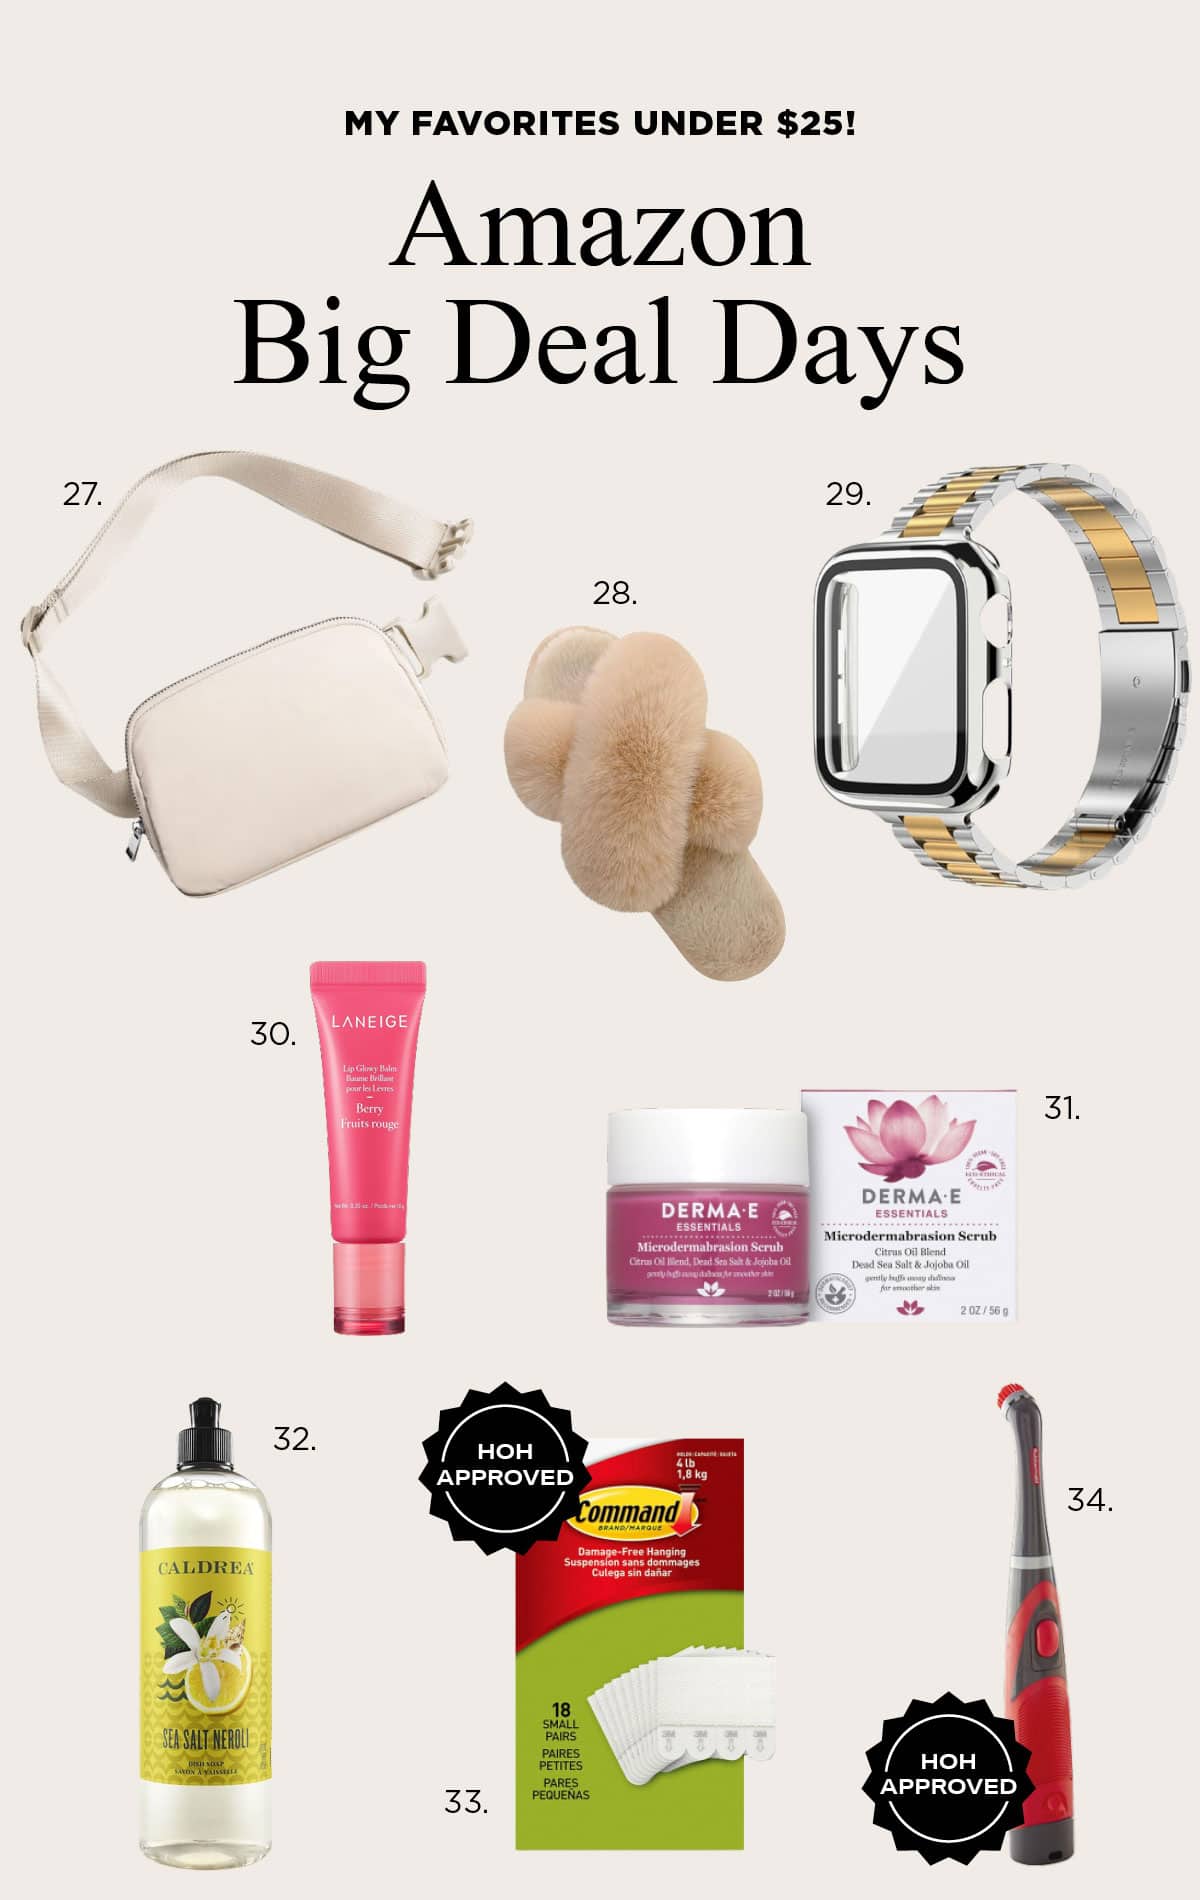 Tips for getting the best  Prime Big Deal Days deals